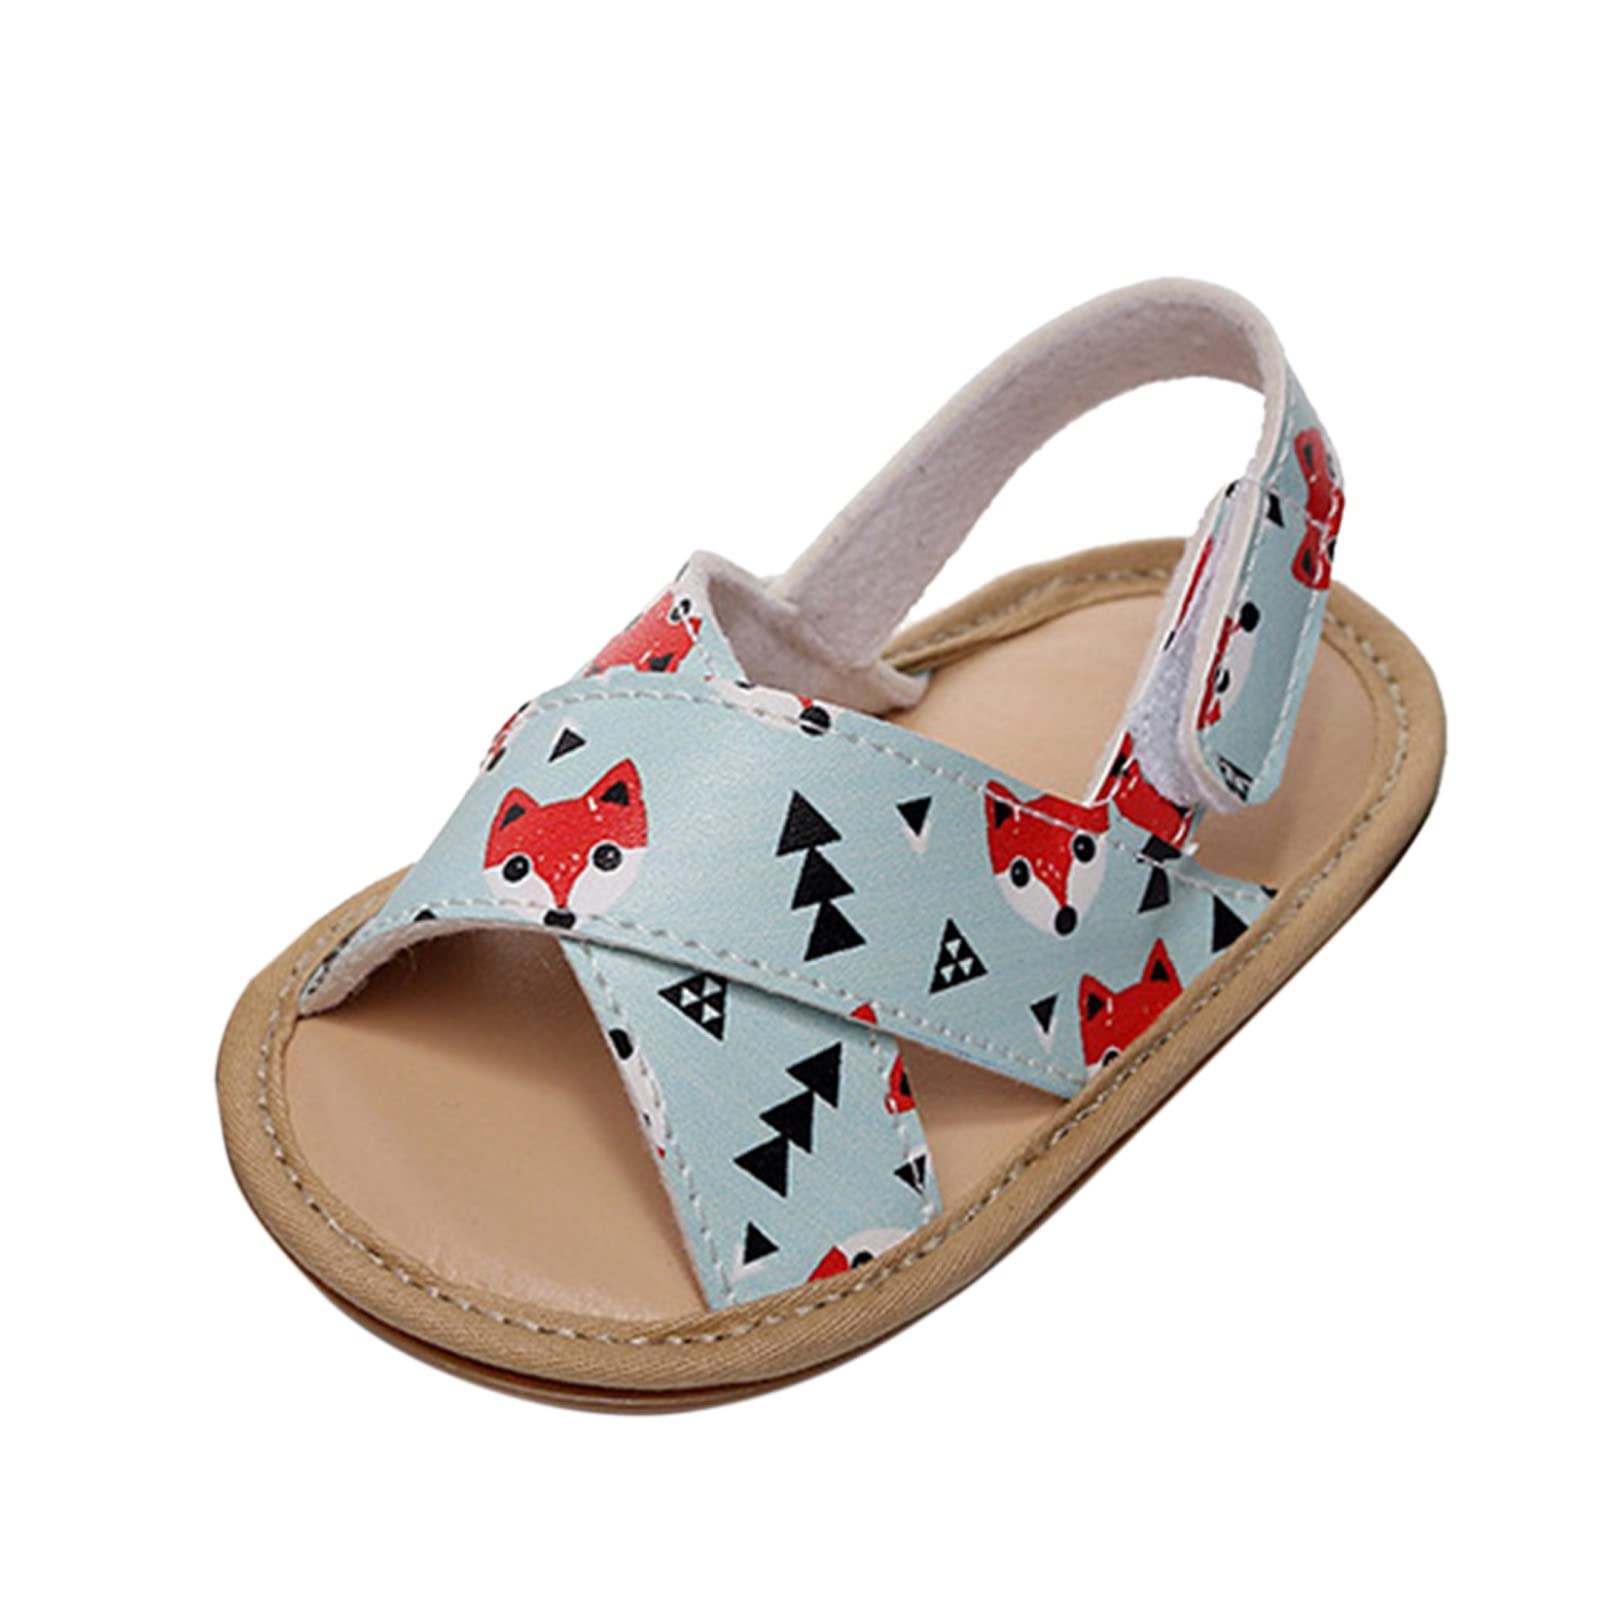 TODOZO Infant Boys Girls Open Toe Cartoon Printed Shoes First Walkers Shoes Summer Toddler Flat Sandals Mesh Play Sandals